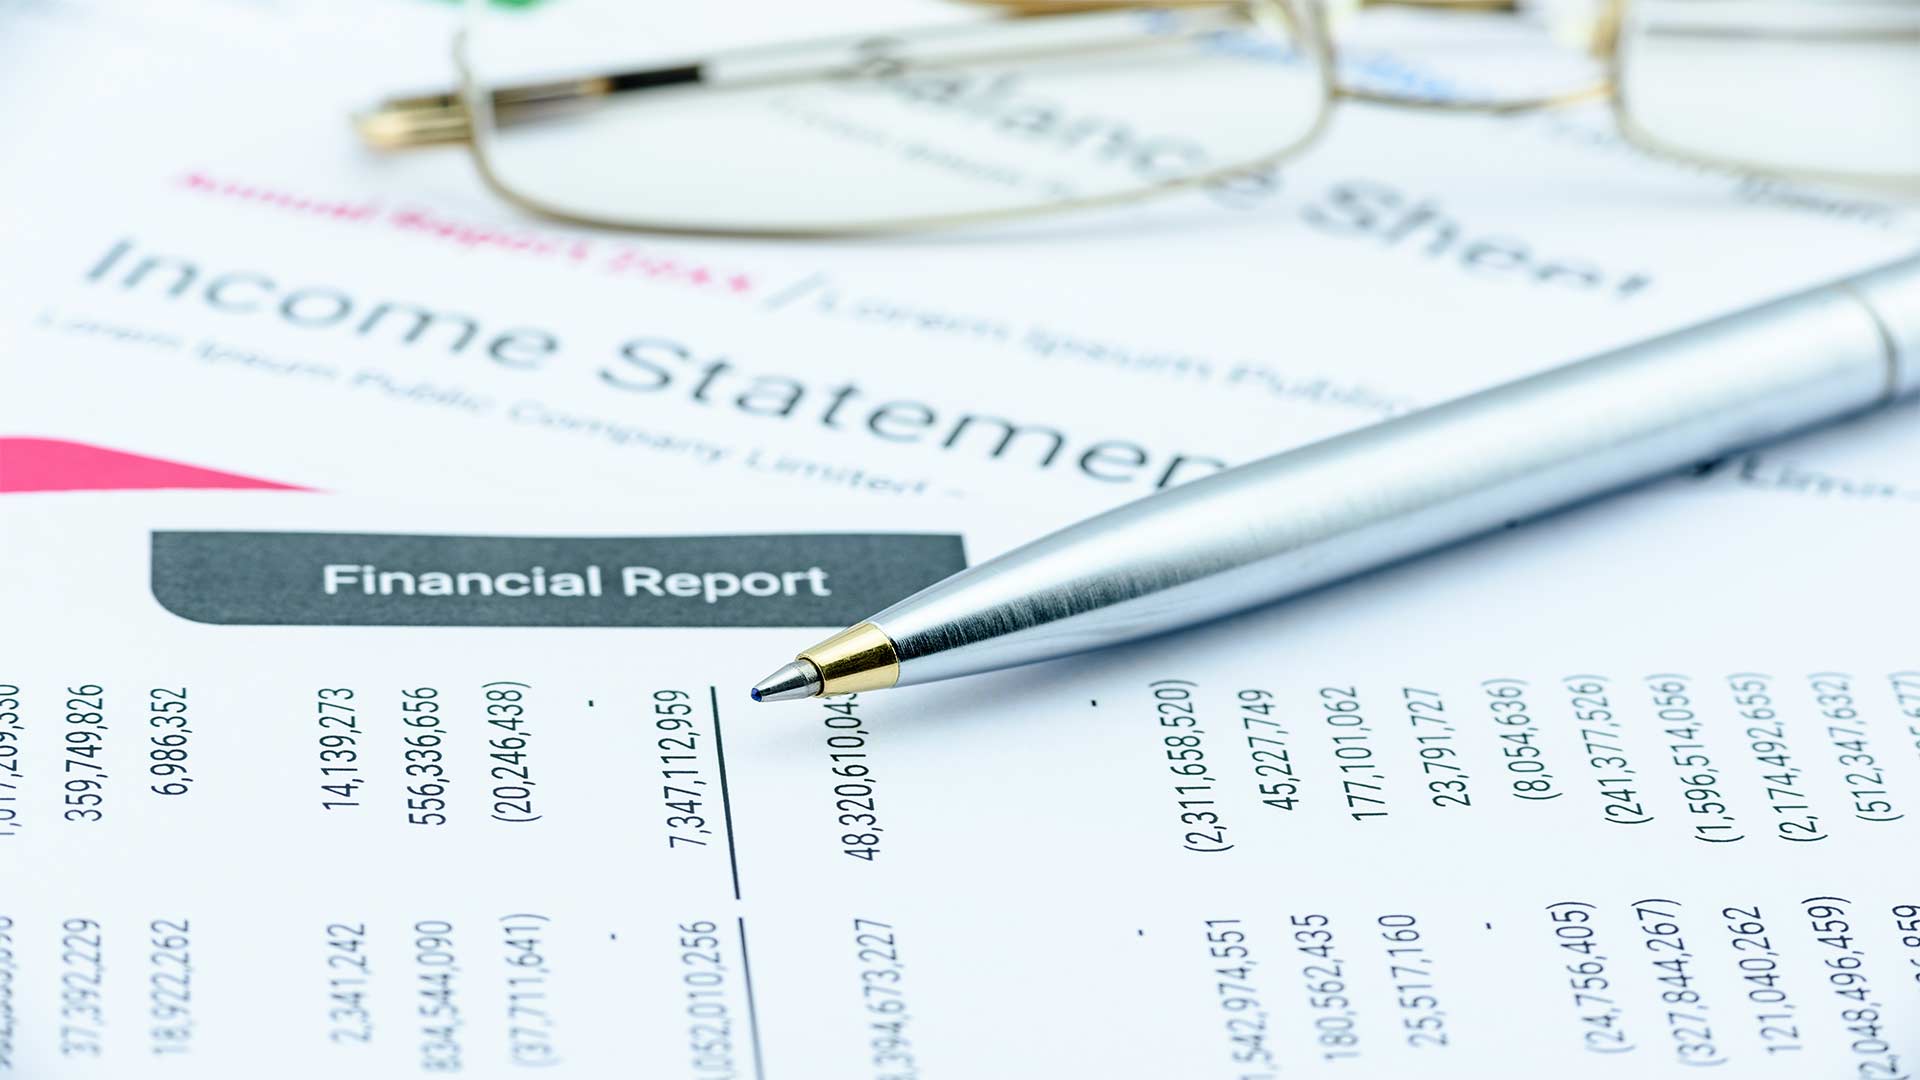 Financial Statement Report for my Business